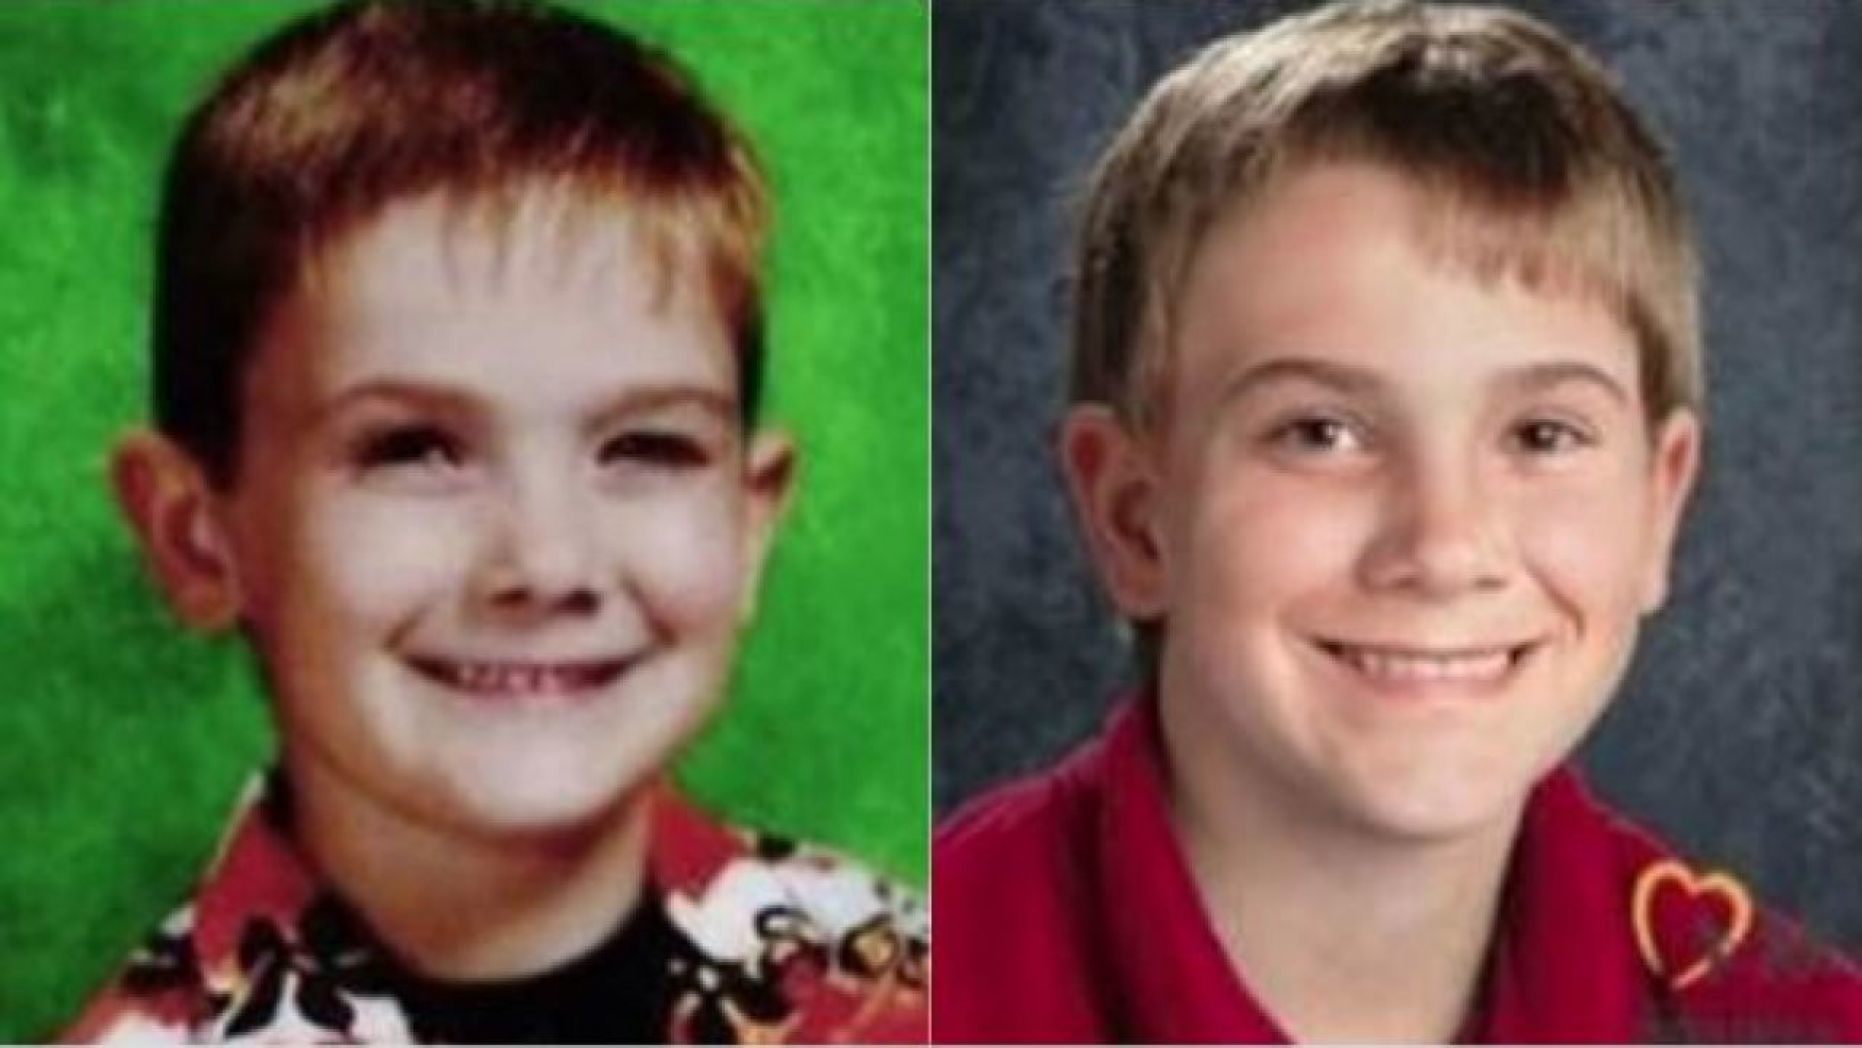 Teen in Kentucky Claims He’s Long-Missing Illinois Boy Who Vanished 8 Years Ago